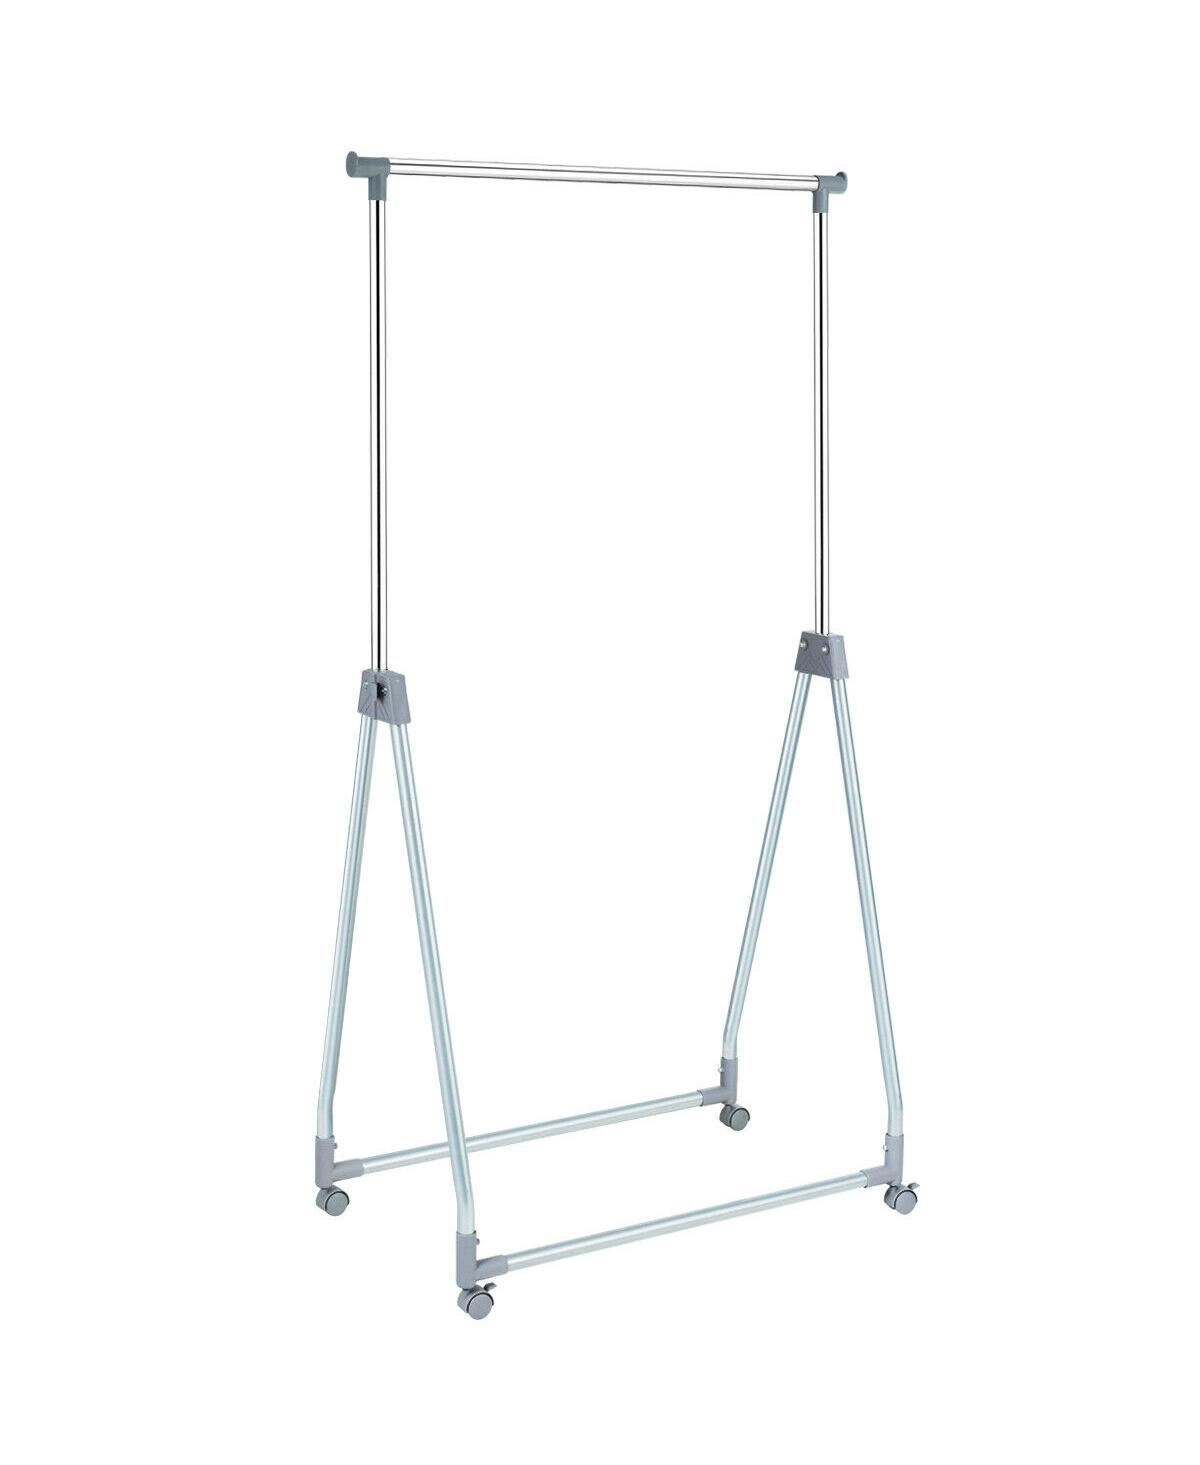 Extendable Foldable Heavy Duty Clothing Rack with Hanging Rod - Silver